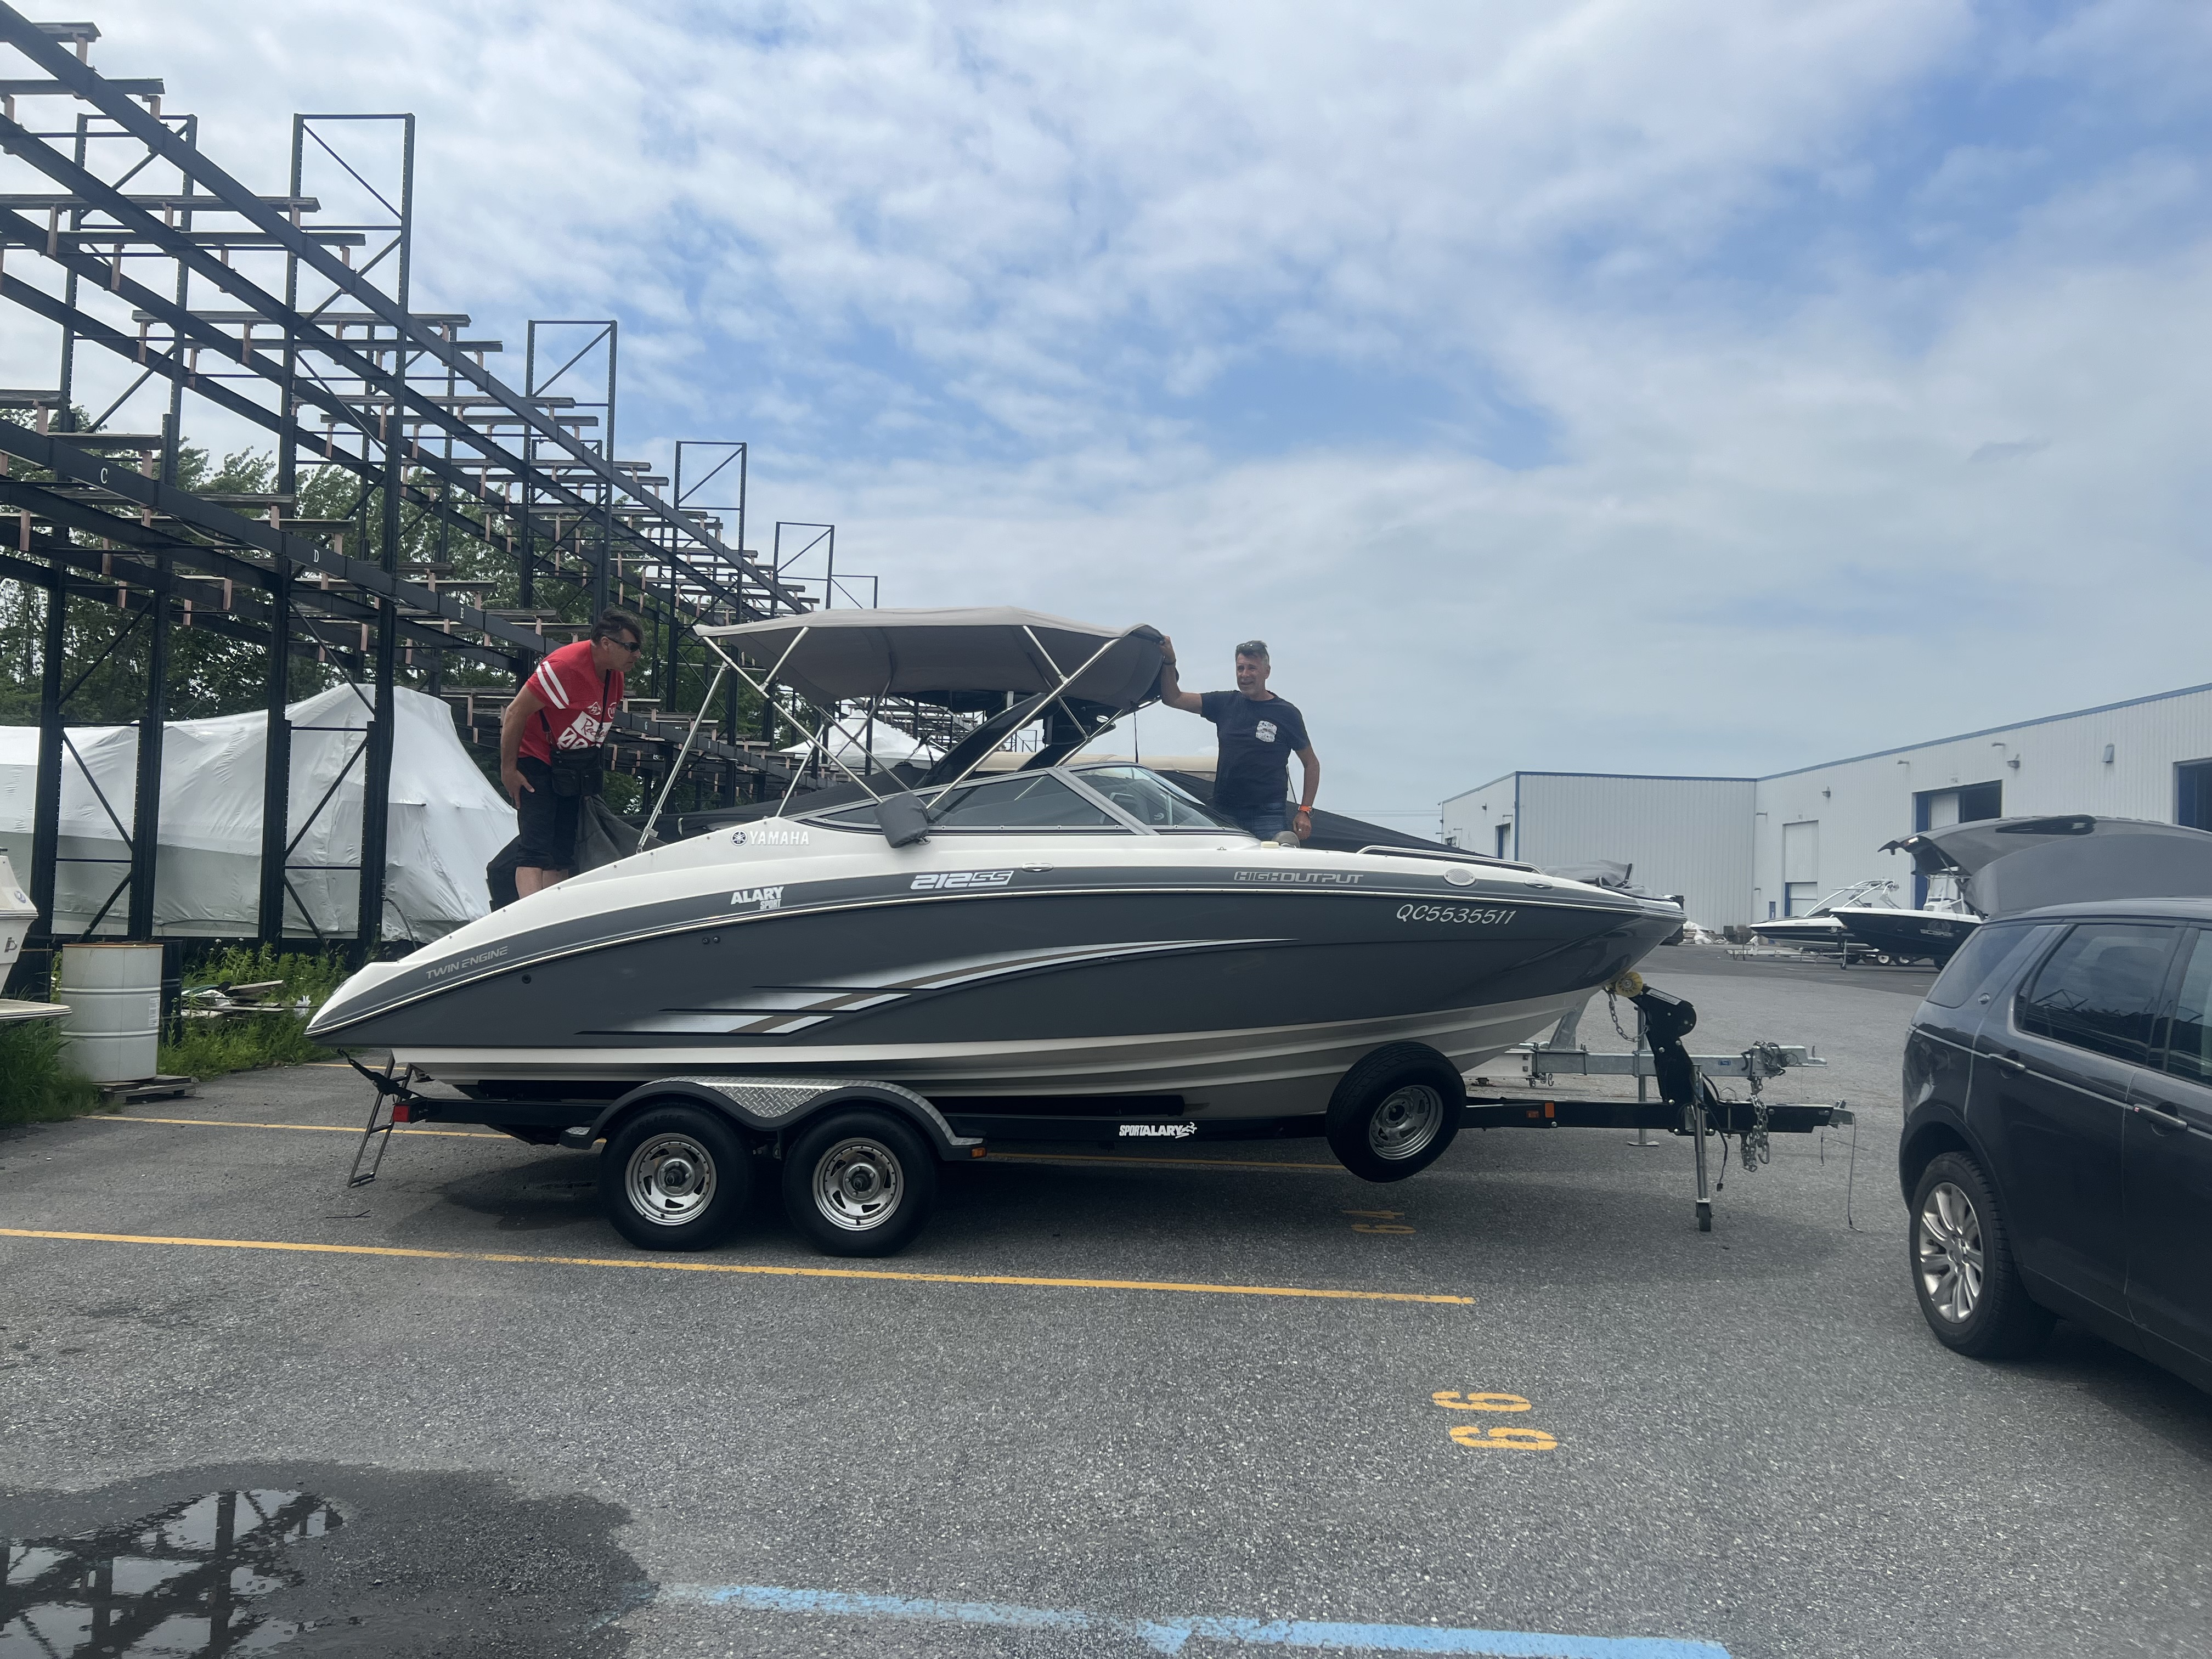 2015 Yamaha 212SS Power boat for sale in Quebec, Canada - image 3 